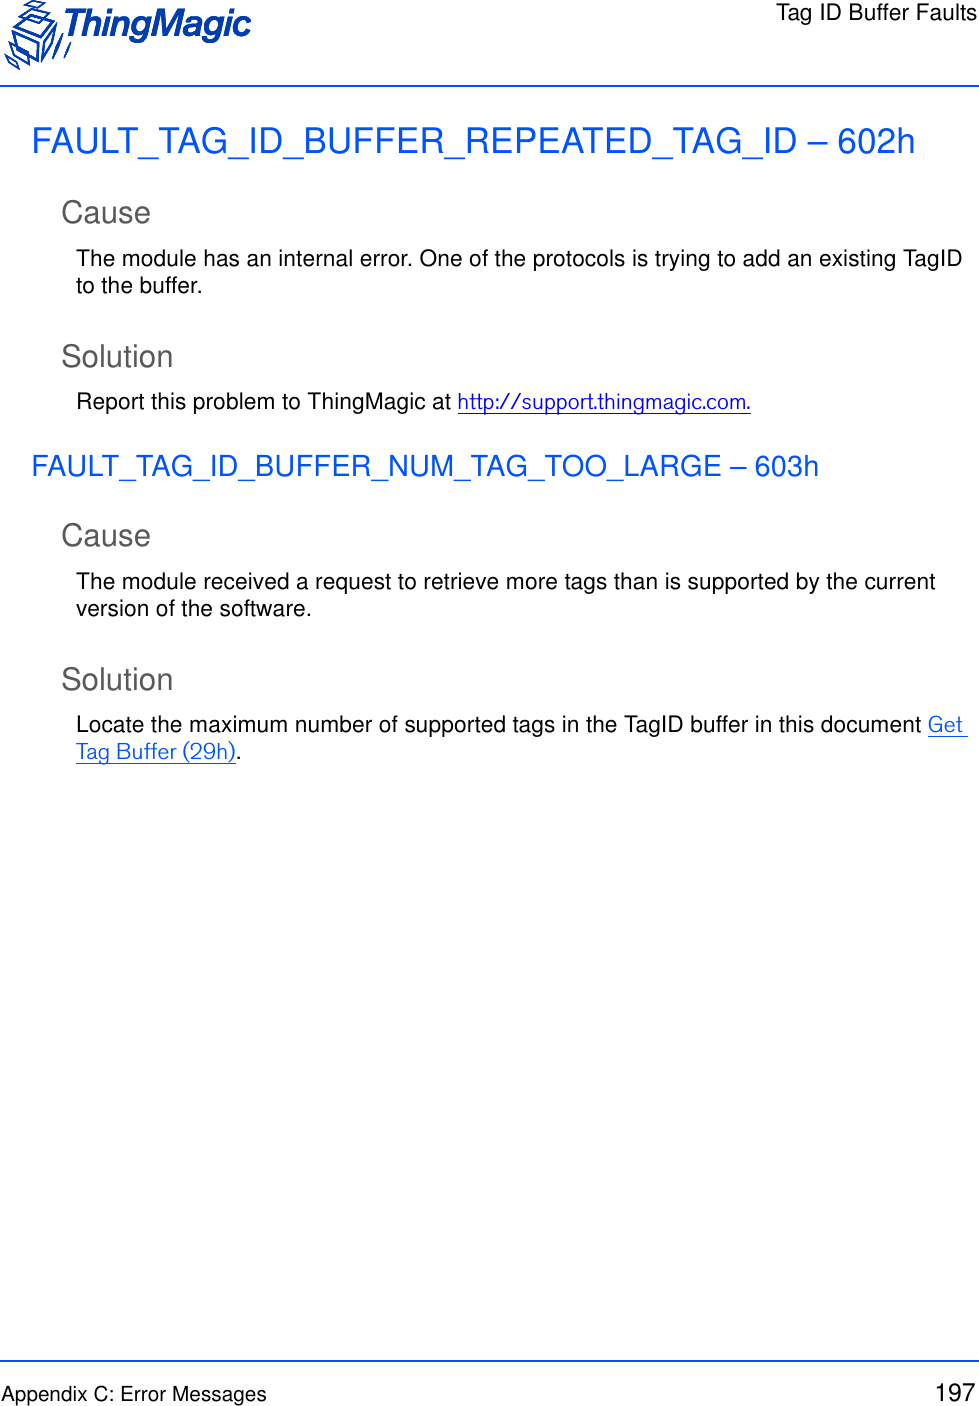 Tag ID Buffer FaultsAppendix C: Error Messages 197FAULT_TAG_ID_BUFFER_REPEATED_TAG_ID – 602hCauseThe module has an internal error. One of the protocols is trying to add an existing TagID to the buffer.SolutionReport this problem to ThingMagic at http://support.thingmagic.com.FAULT_TAG_ID_BUFFER_NUM_TAG_TOO_LARGE – 603hCauseThe module received a request to retrieve more tags than is supported by the current version of the software.SolutionLocate the maximum number of supported tags in the TagID buffer in this document Get Tag Buffer (29h).